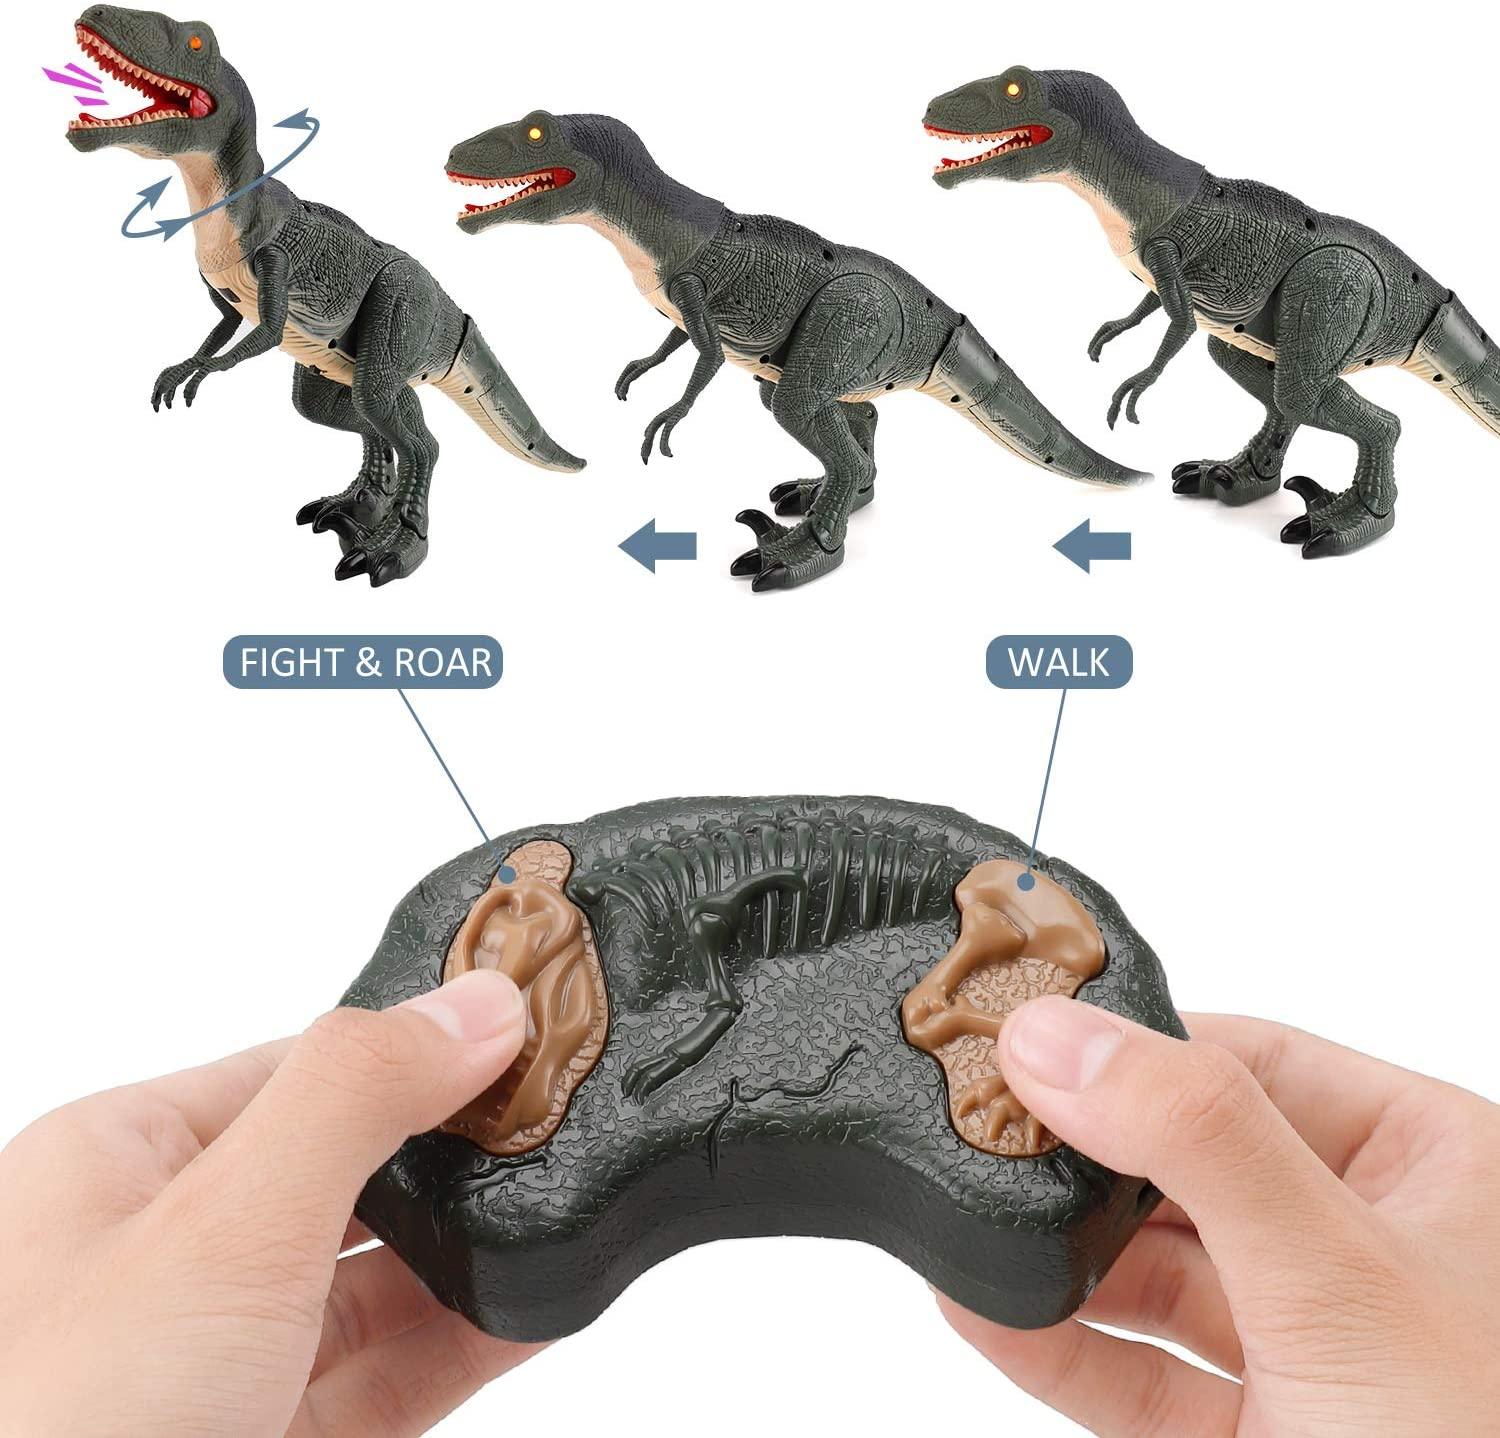 Remote Control R C Walking Dinosaur Toy With Shaking Head,Light Up Eyes & Sounds ,Velociraptor,Gift For Kids Amazon Platform Banned - TOYCENT 